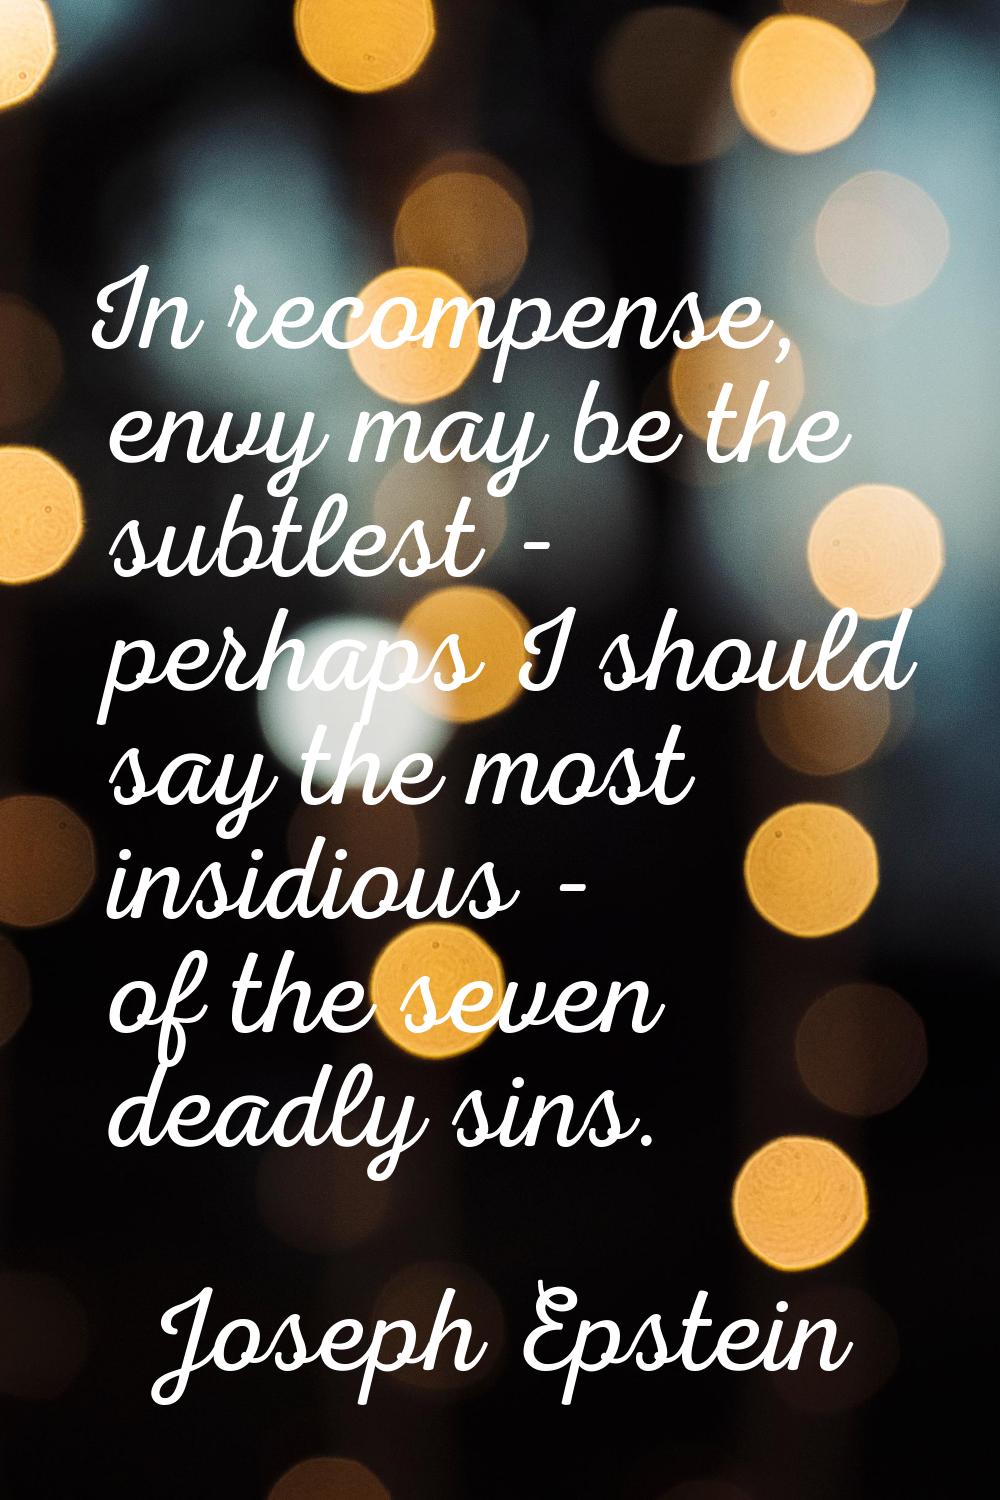 In recompense, envy may be the subtlest - perhaps I should say the most insidious - of the seven de